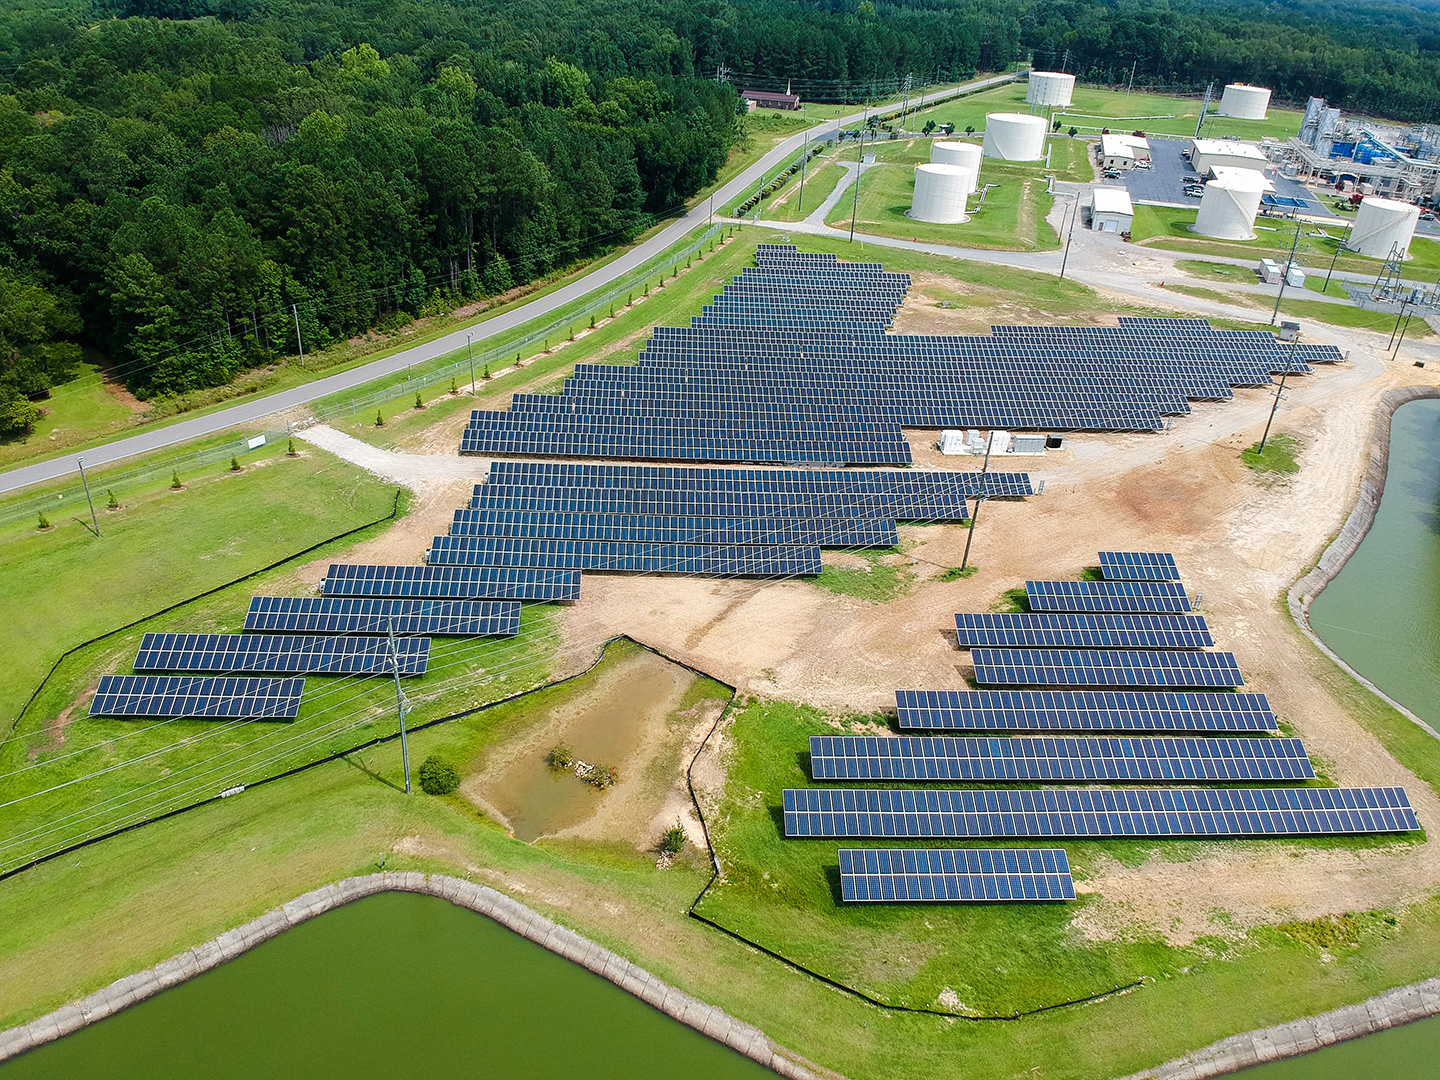 One example of a ground-mounted solar system is this one located at a large site in North Carolina that collects solar energy for the community. 